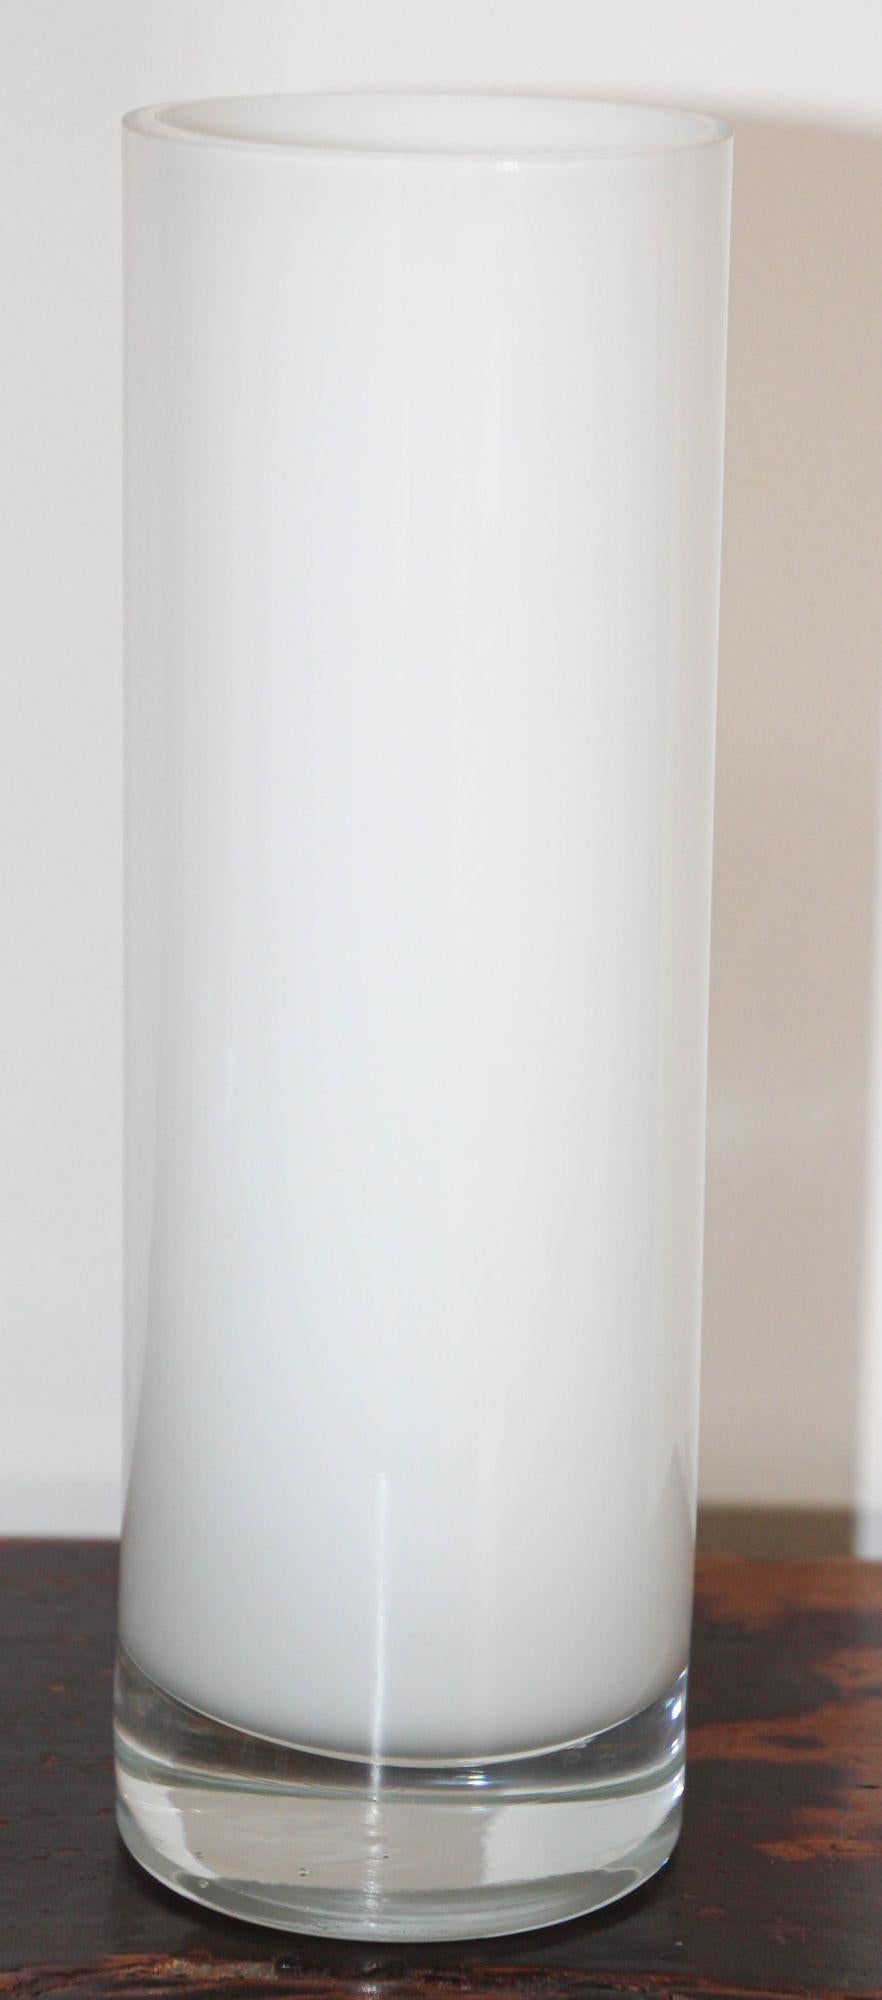 Modernist Minimalist White Glass Flower Vase In Good Condition For Sale In North Hollywood, CA